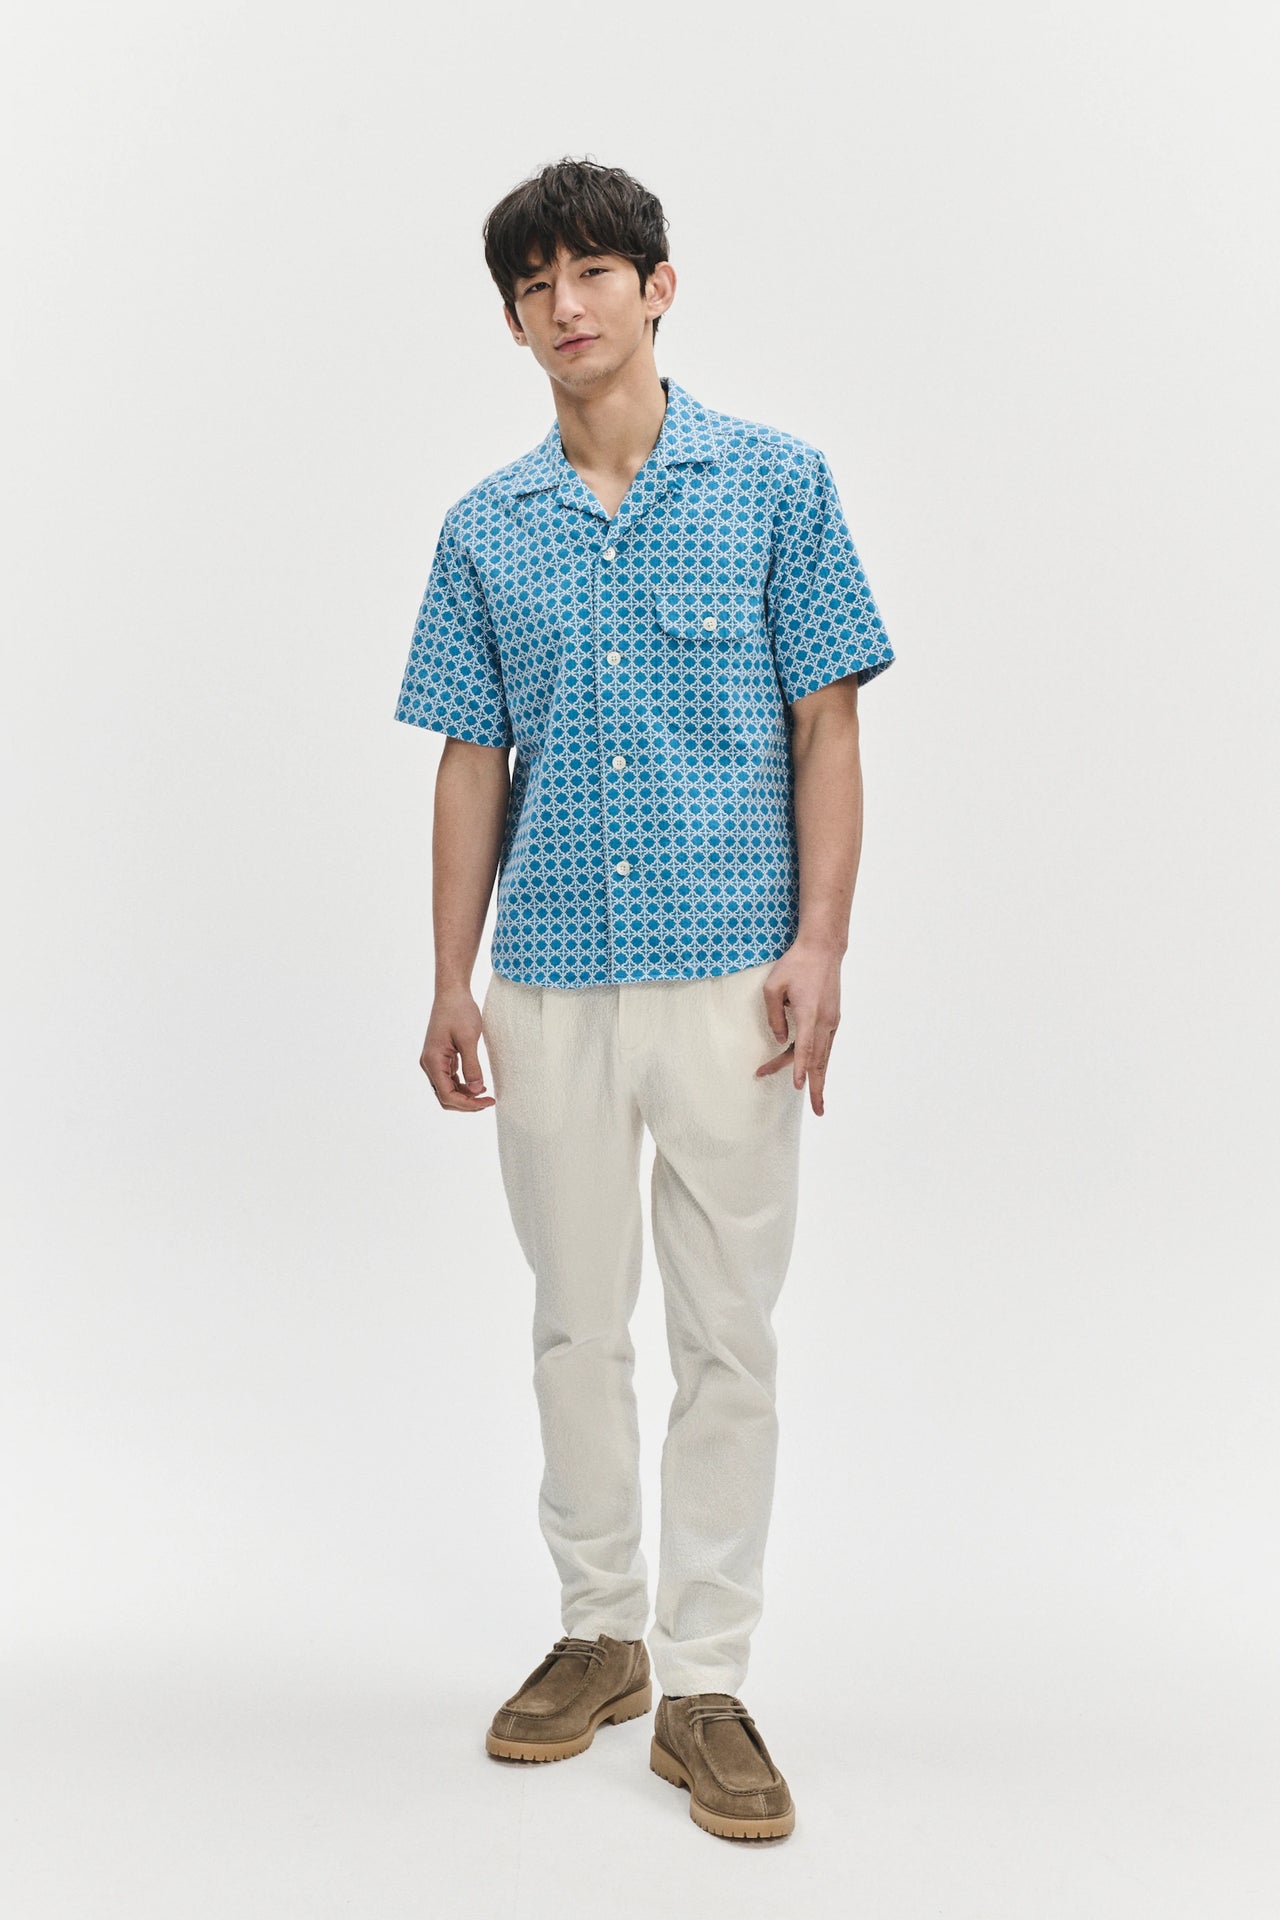 Short Sleeve Camp Collar Shirt in a Vibrant Turquoise Blue Jacquard Portuguese Cotton